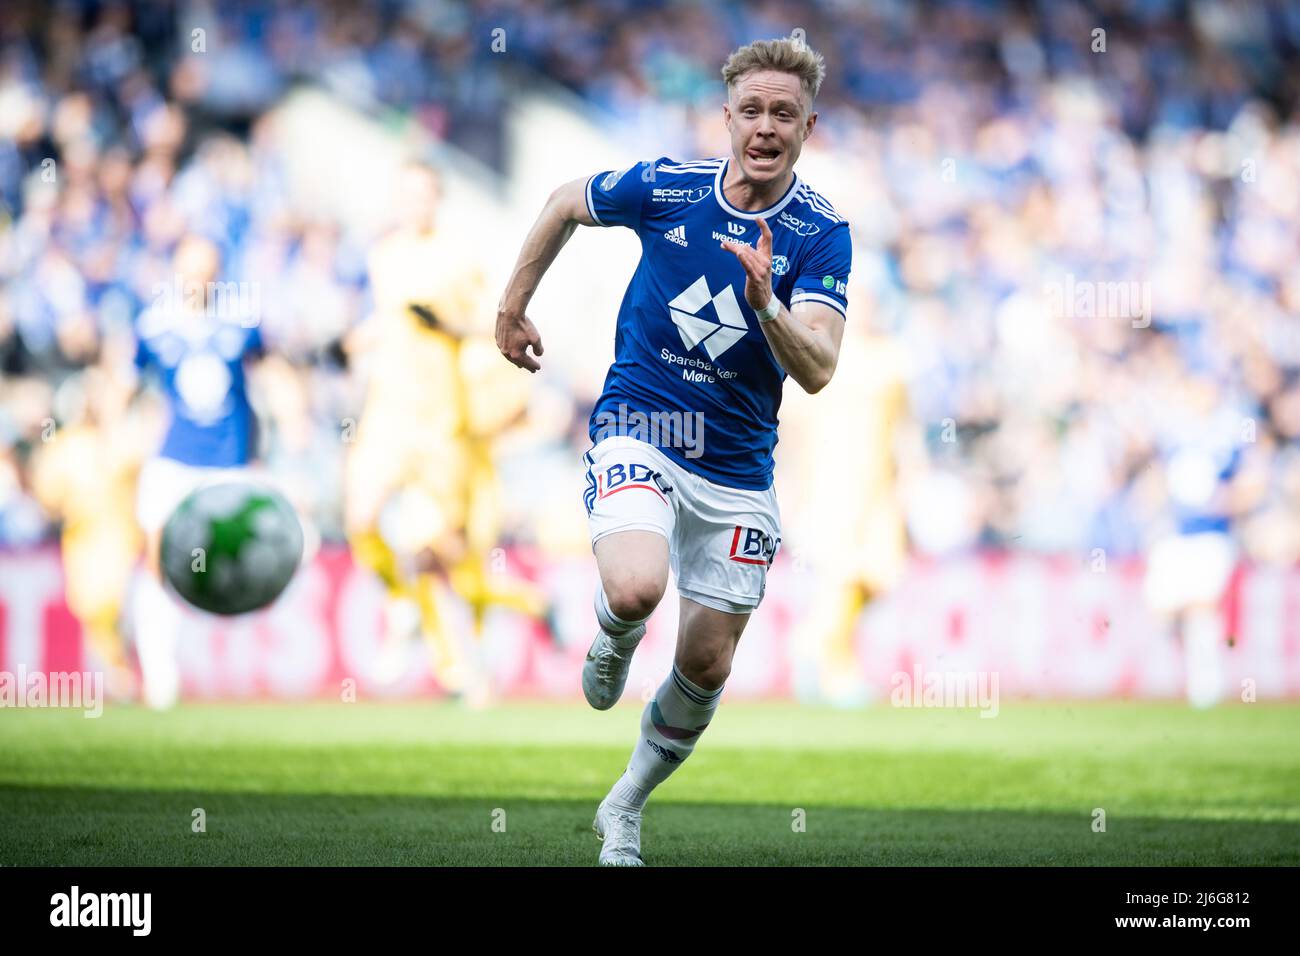 Oslo, Norway. 01st, May 2022. Ola Brynhildsen (11) of Molde seen during the Norwegian Cup final, the NM Menn final, between Bodoe/Glimt and Molde at Ullevaal Stadion in Oslo. (Photo credit: Gonzales Photo - Jan-Erik Eriksen). Credit: Gonzales Photo/Alamy Live News Stock Photo